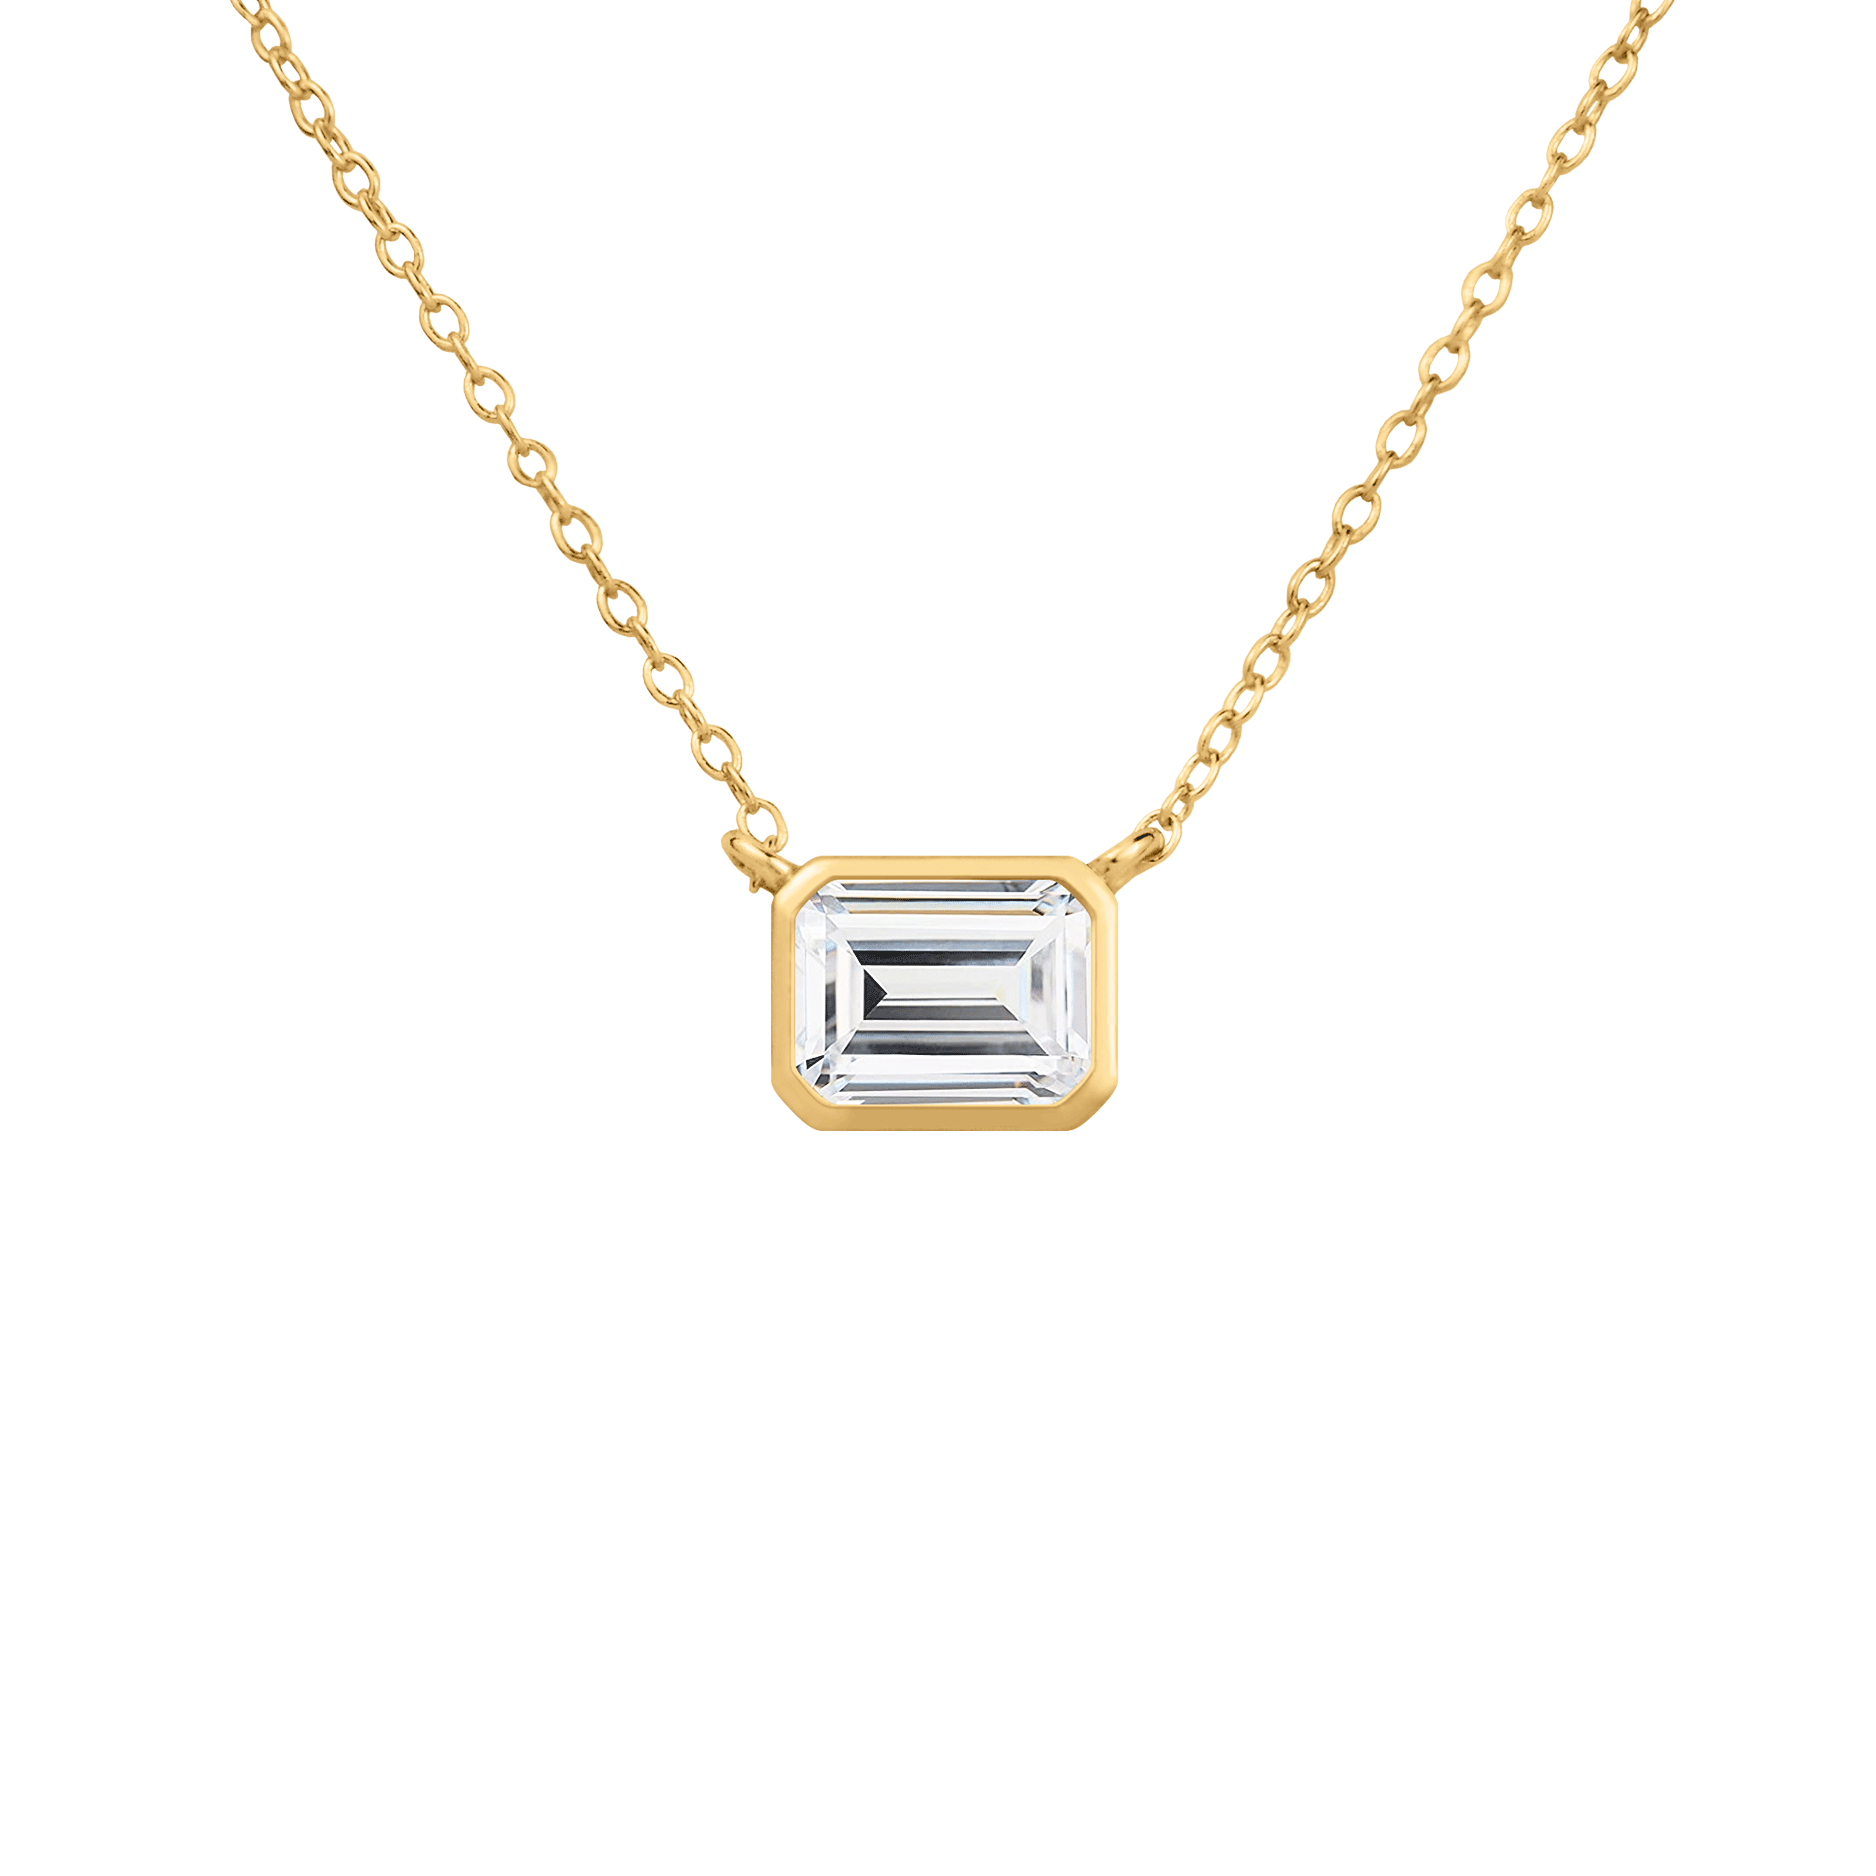 Tender Objects New Light Necklace - A chic and contemporary piece to elevate your style with modern elegance.